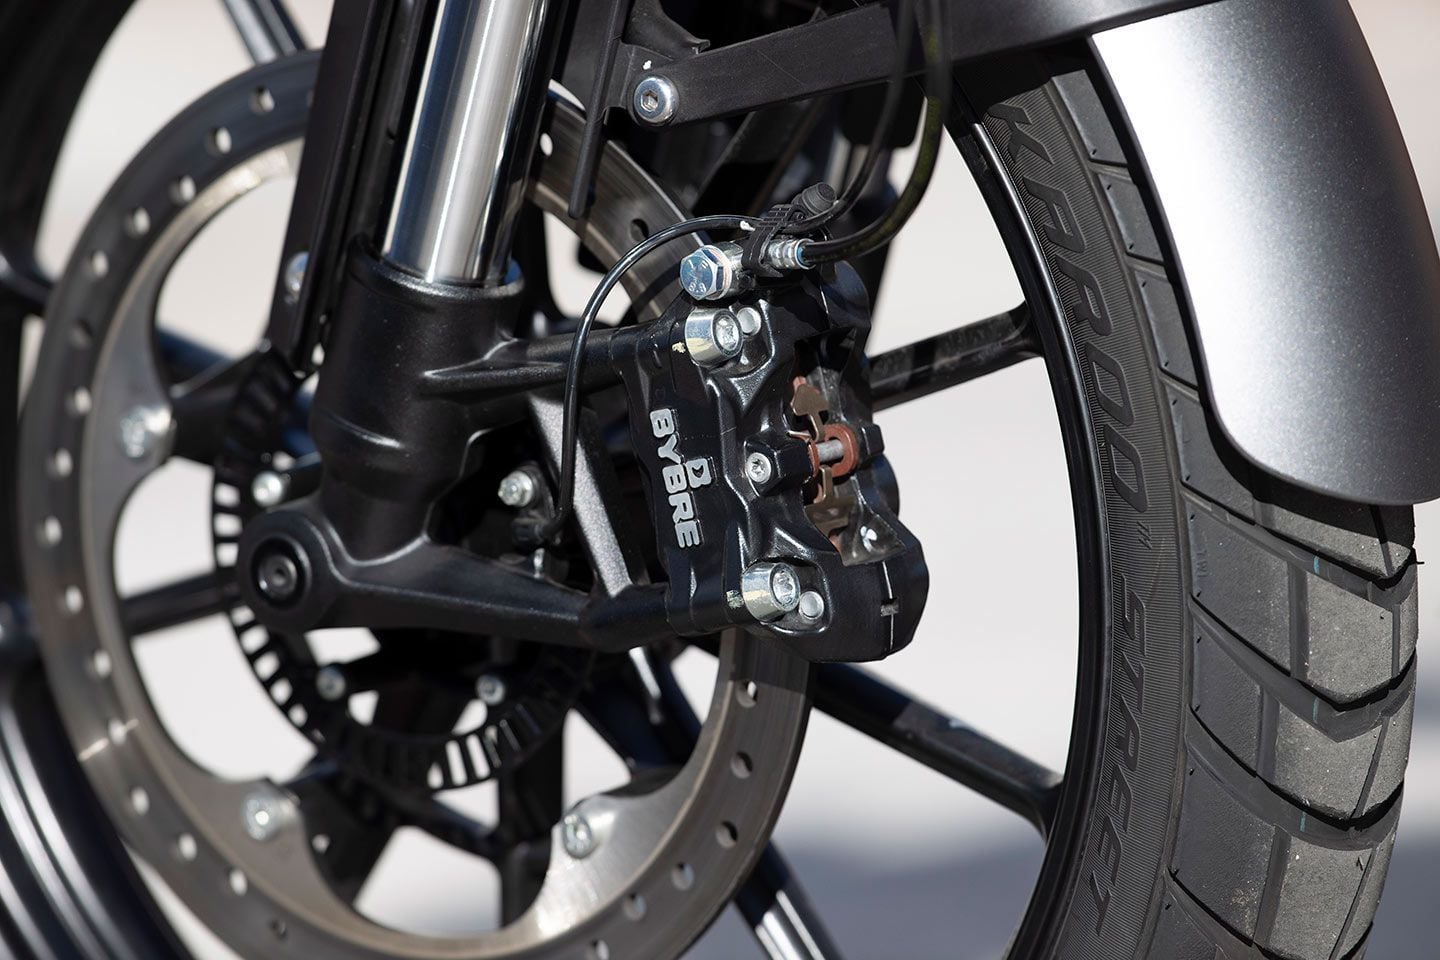 Both the Speed and Scrambler 400 X use a four-piston radial-mount caliper, but the Speed has a more aggressive pad compound.